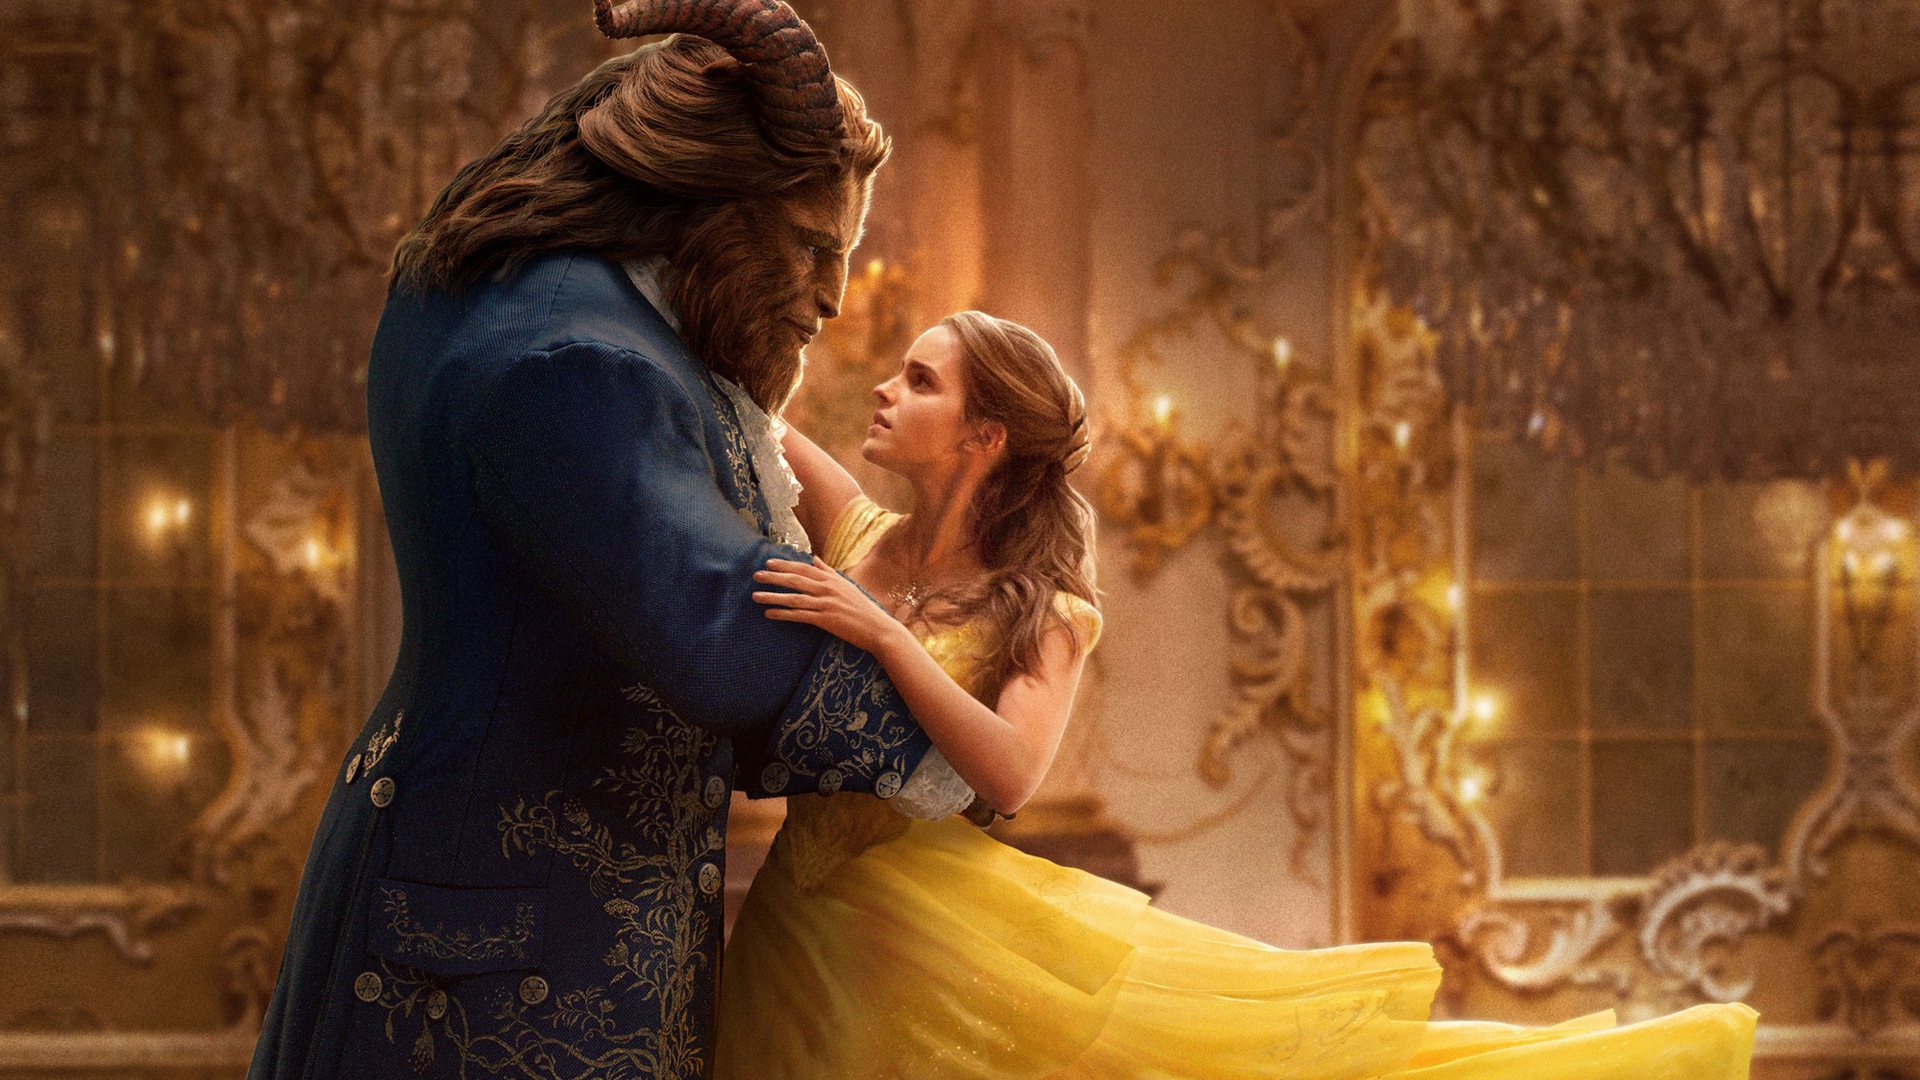 Beauty And The Beast Movie Wallpaper HD